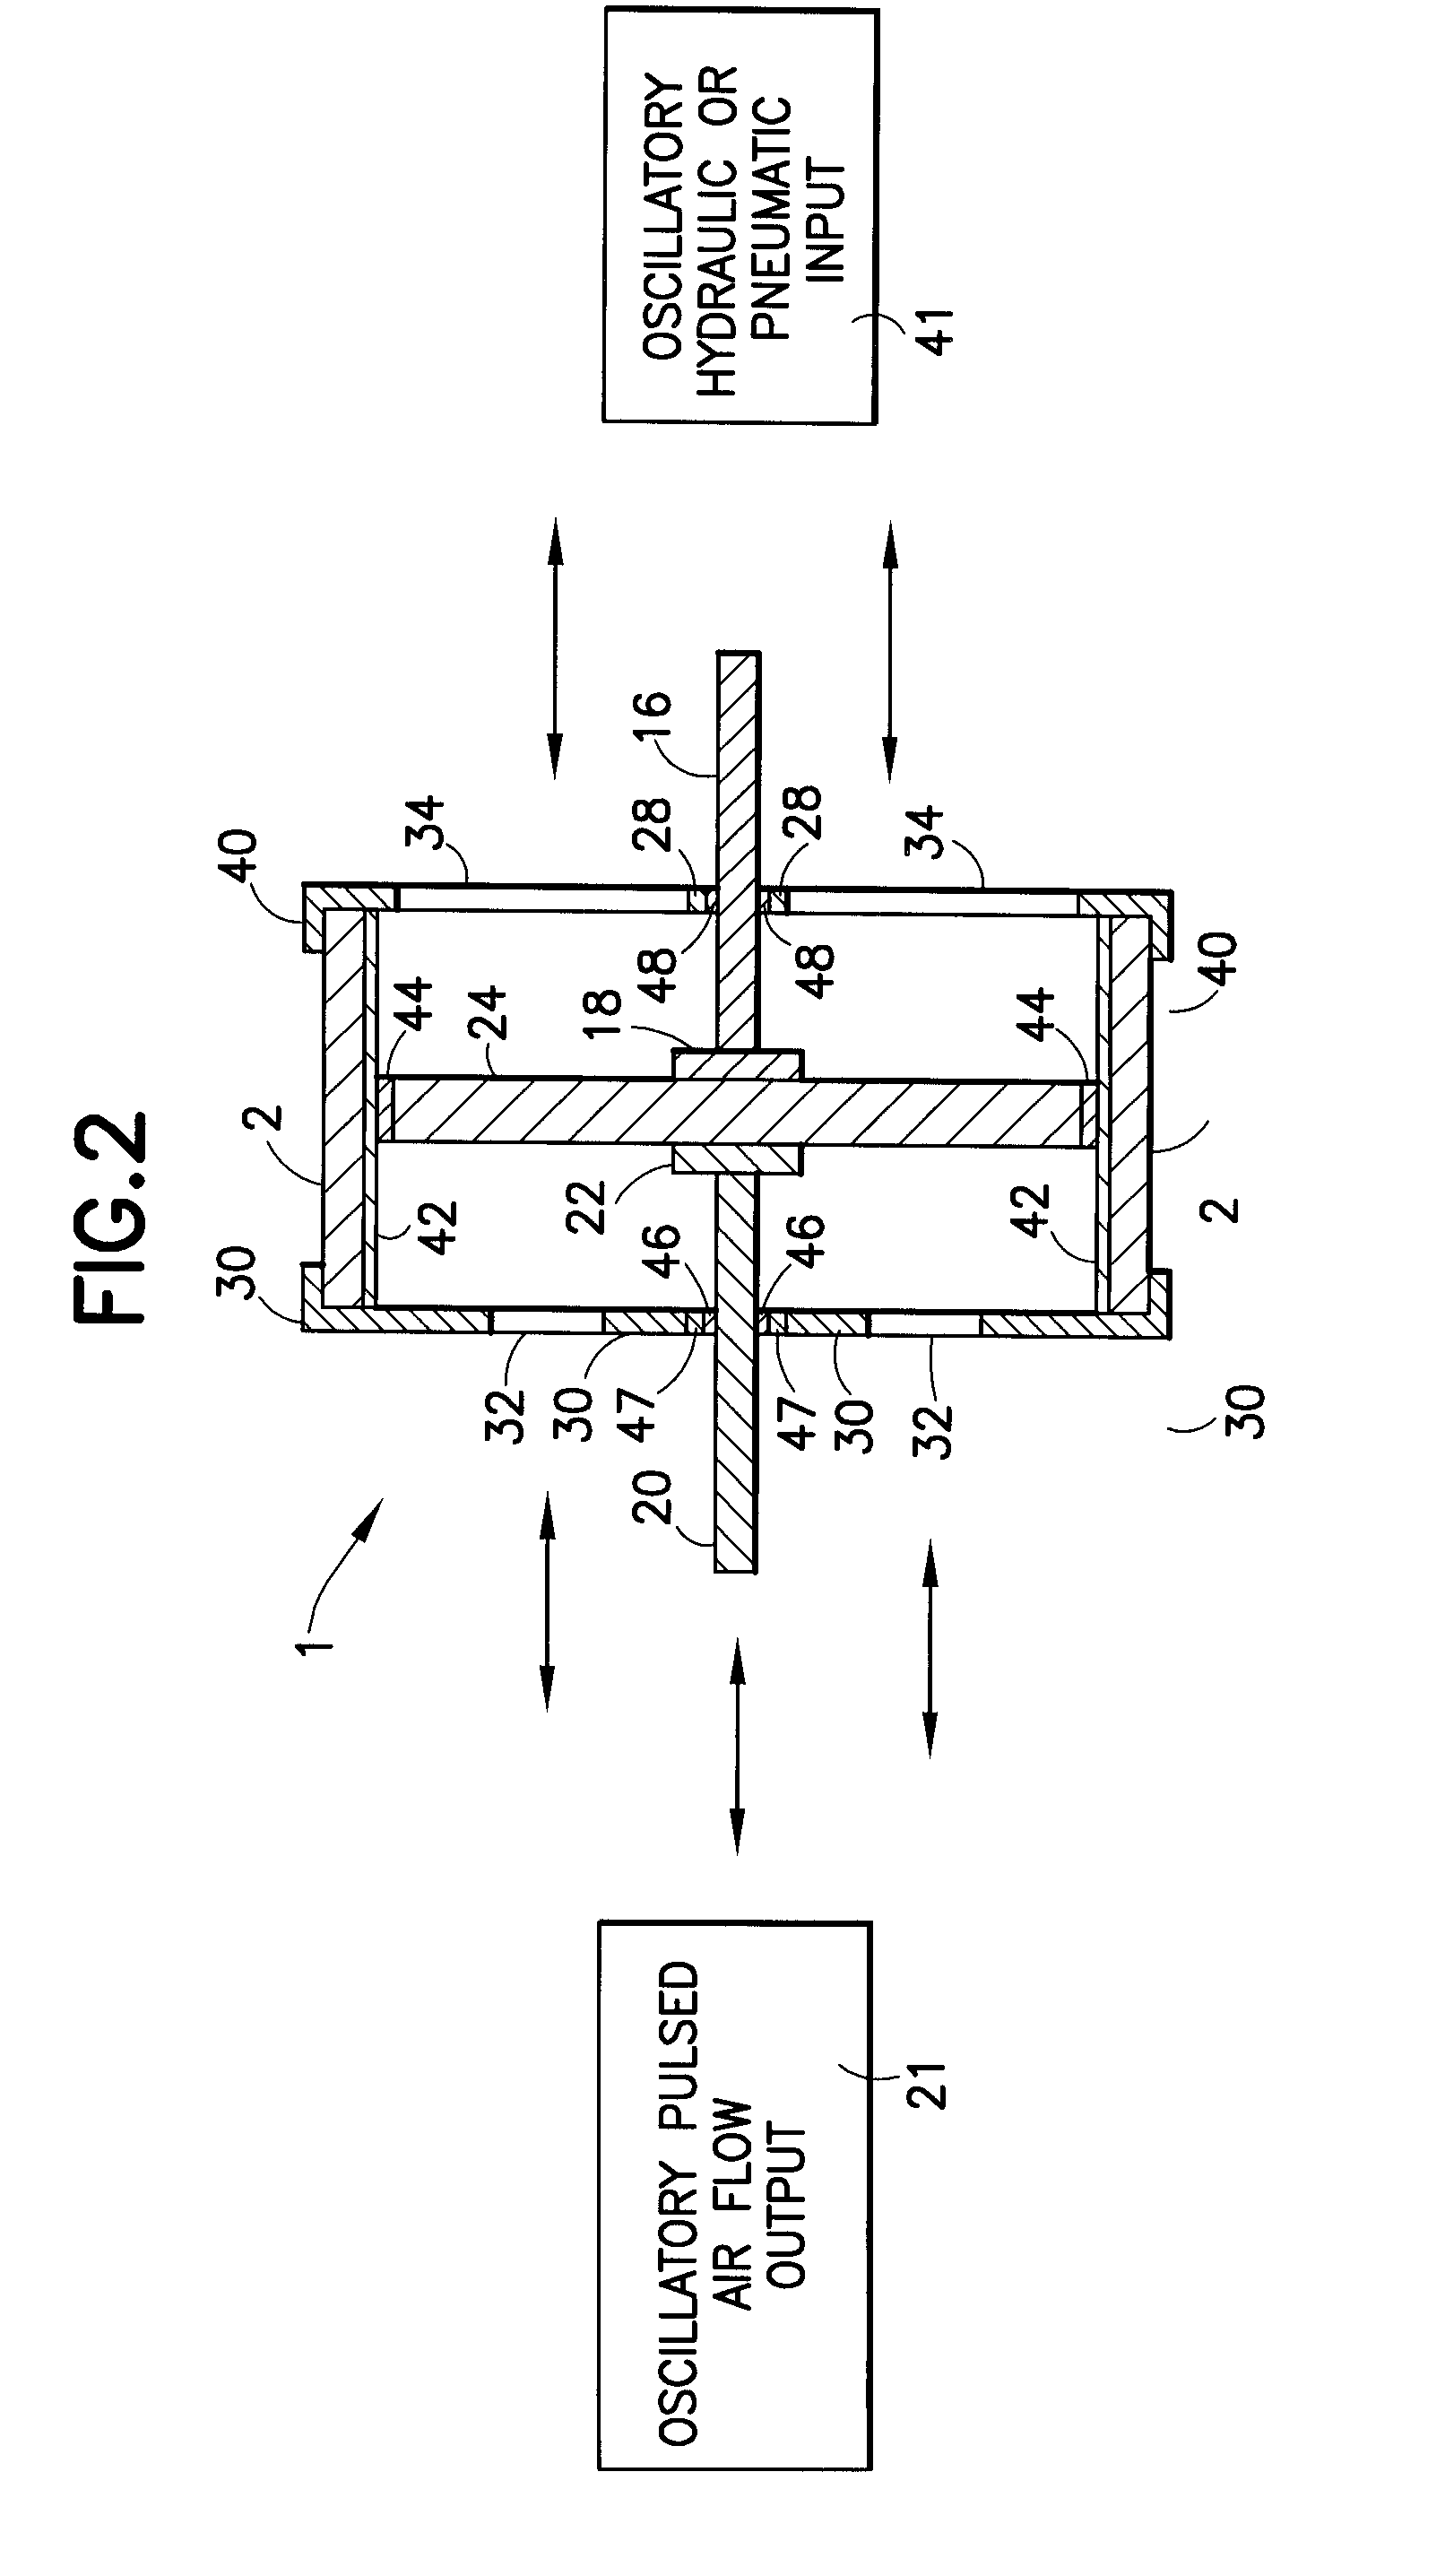 Ultra-Low Friction Air Pump for Creating Oscillatory or Pulsed Jets